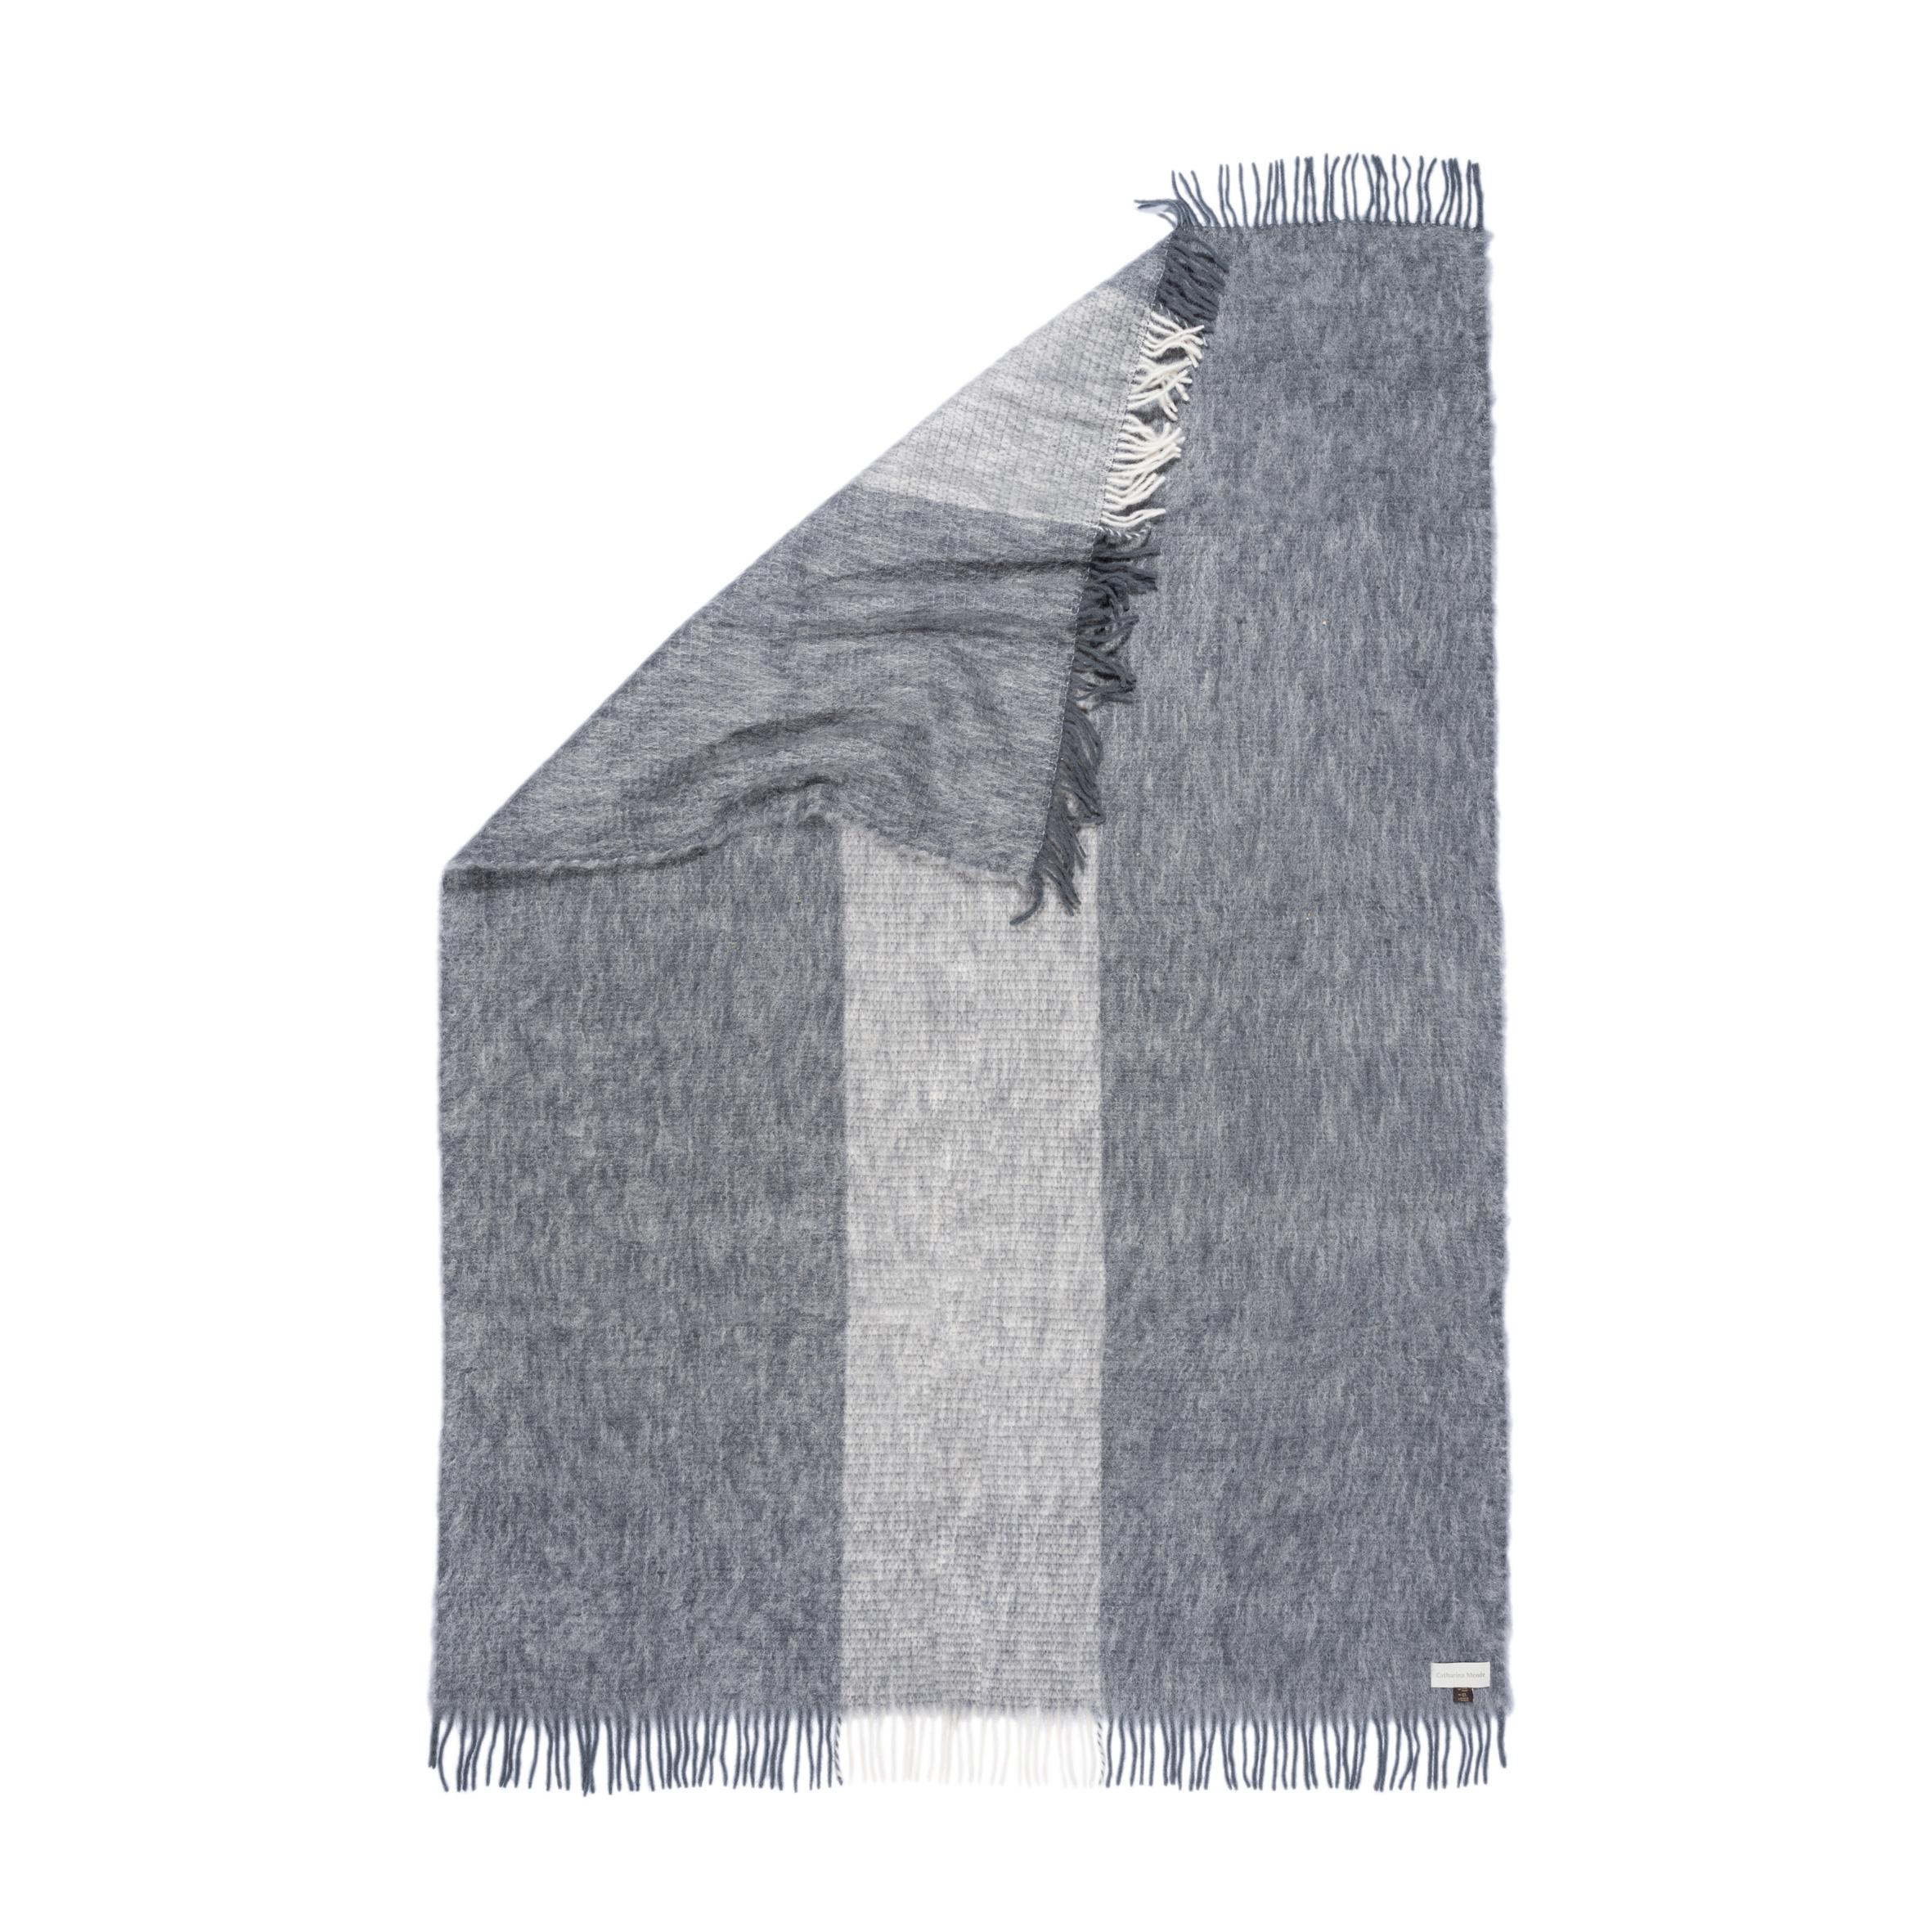 Designed in Berlin by Catharina Mende, woven of 50% mohair, 48% Wool, 2% polyamide in Spain: This grey flattering and warming fluffy mohair blanket is the perfect companion for every season - an indispensable favorite for the home or the